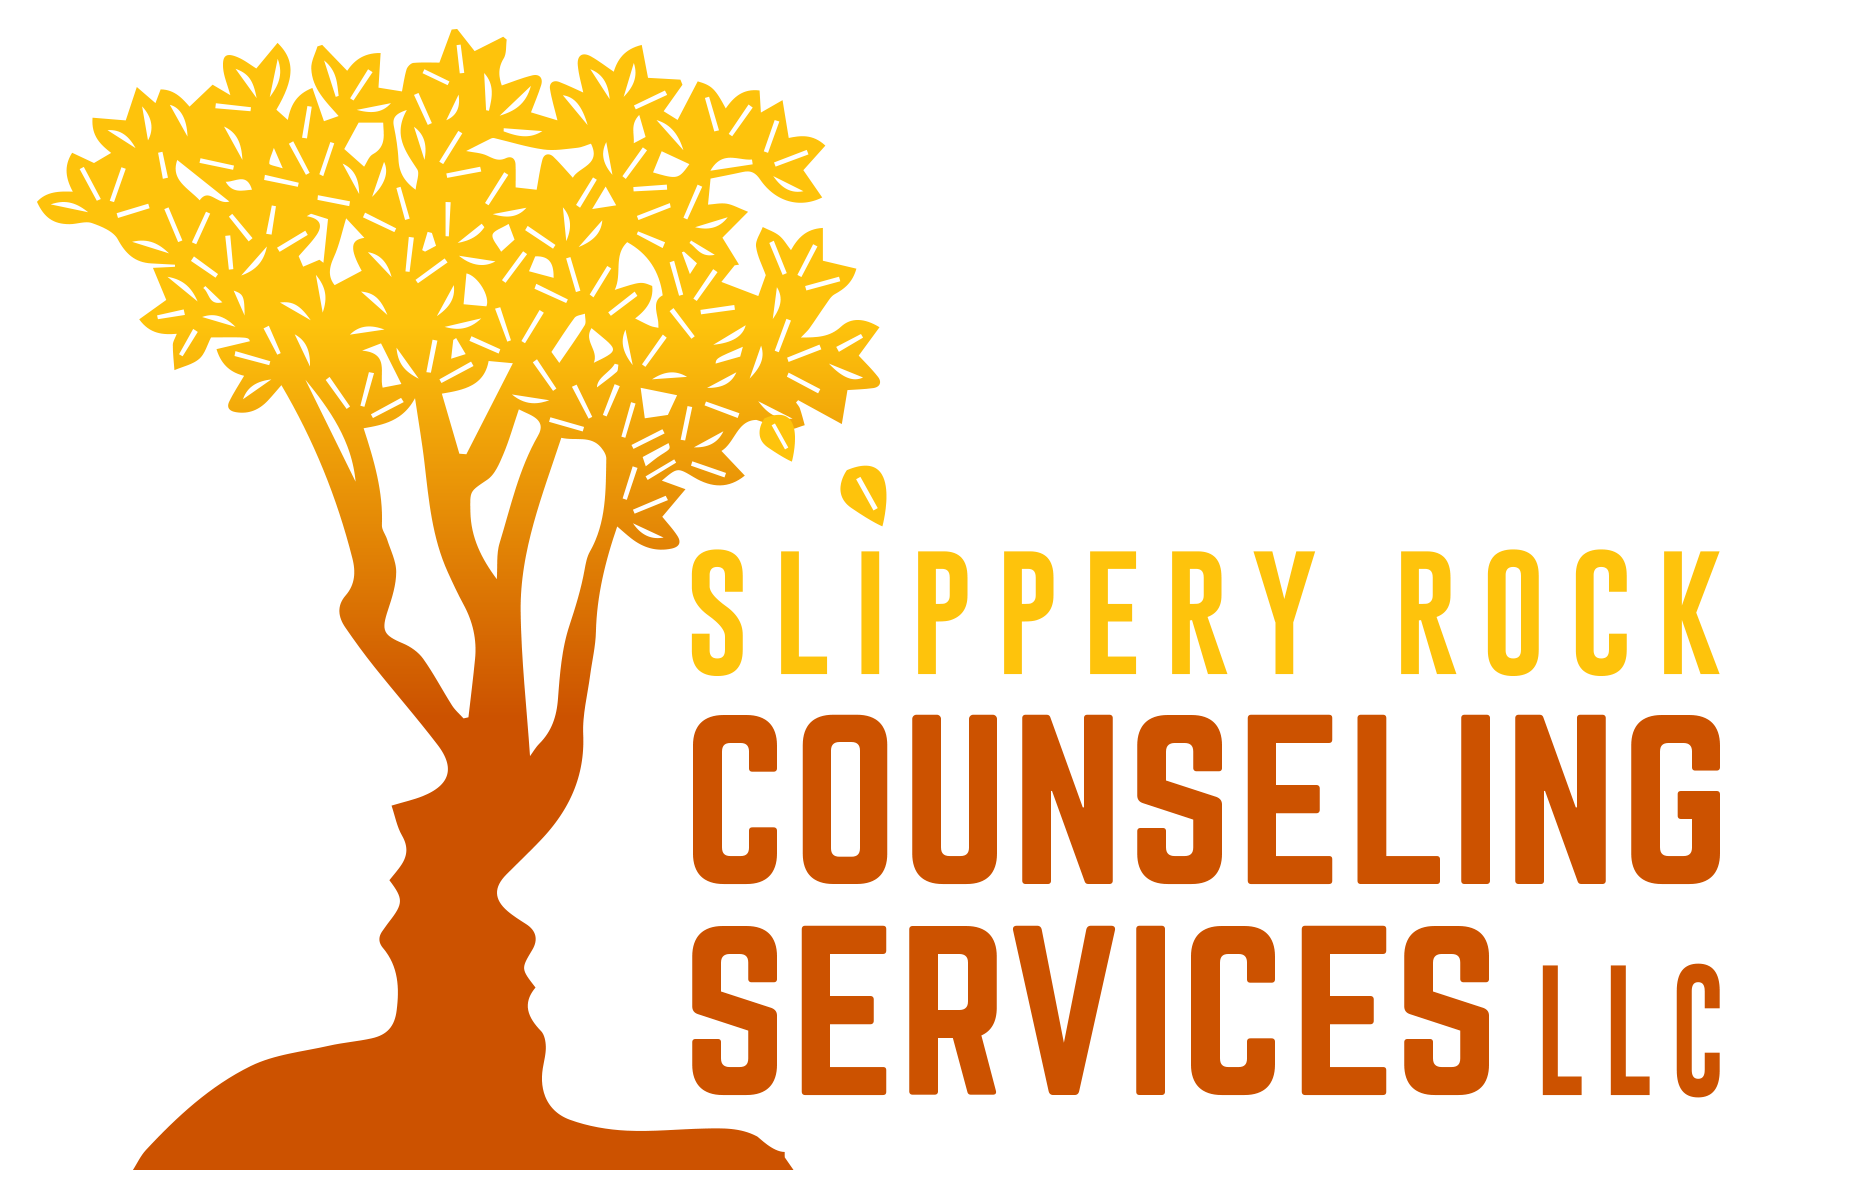 Slippery Rock Counseling Services LLC